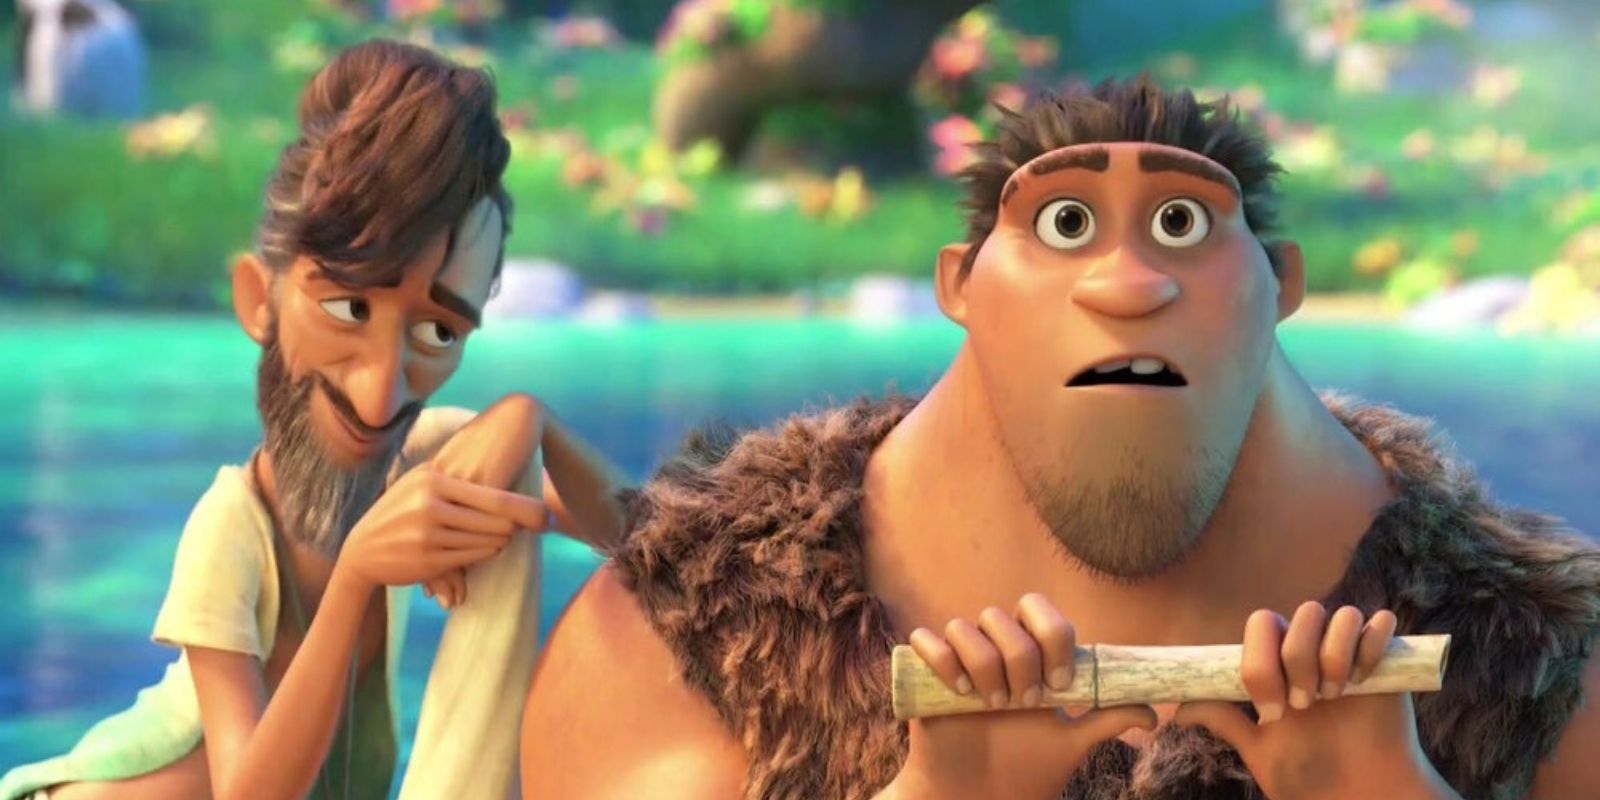 Two characters looking shocked in The Croods.